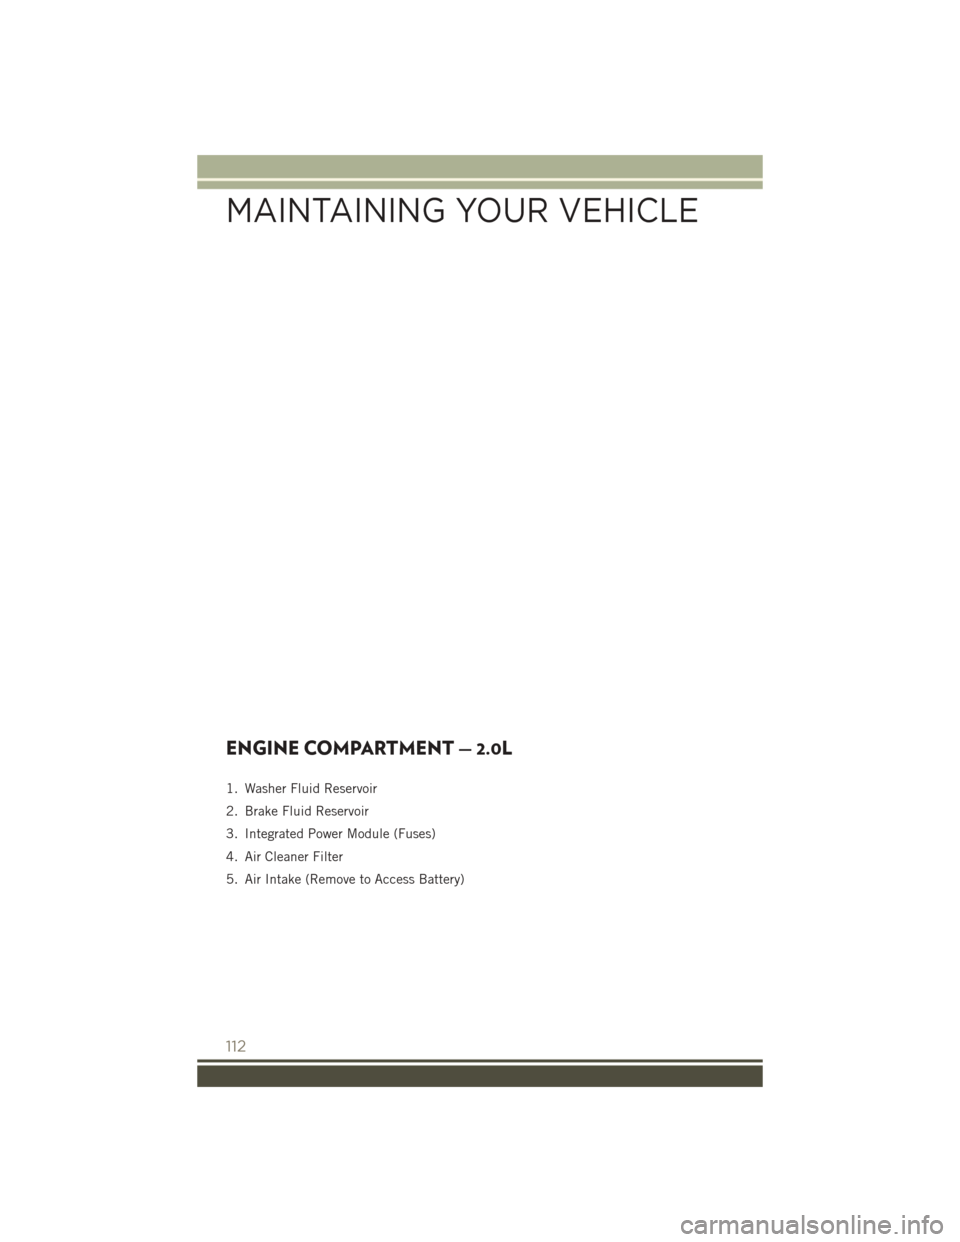 JEEP PATRIOT 2016 1.G User Guide ENGINE COMPARTMENT — 2.0L
1. Washer Fluid Reservoir
2. Brake Fluid Reservoir
3. Integrated Power Module (Fuses)
4. Air Cleaner Filter
5. Air Intake (Remove to Access Battery)
MAINTAINING YOUR VEHICL